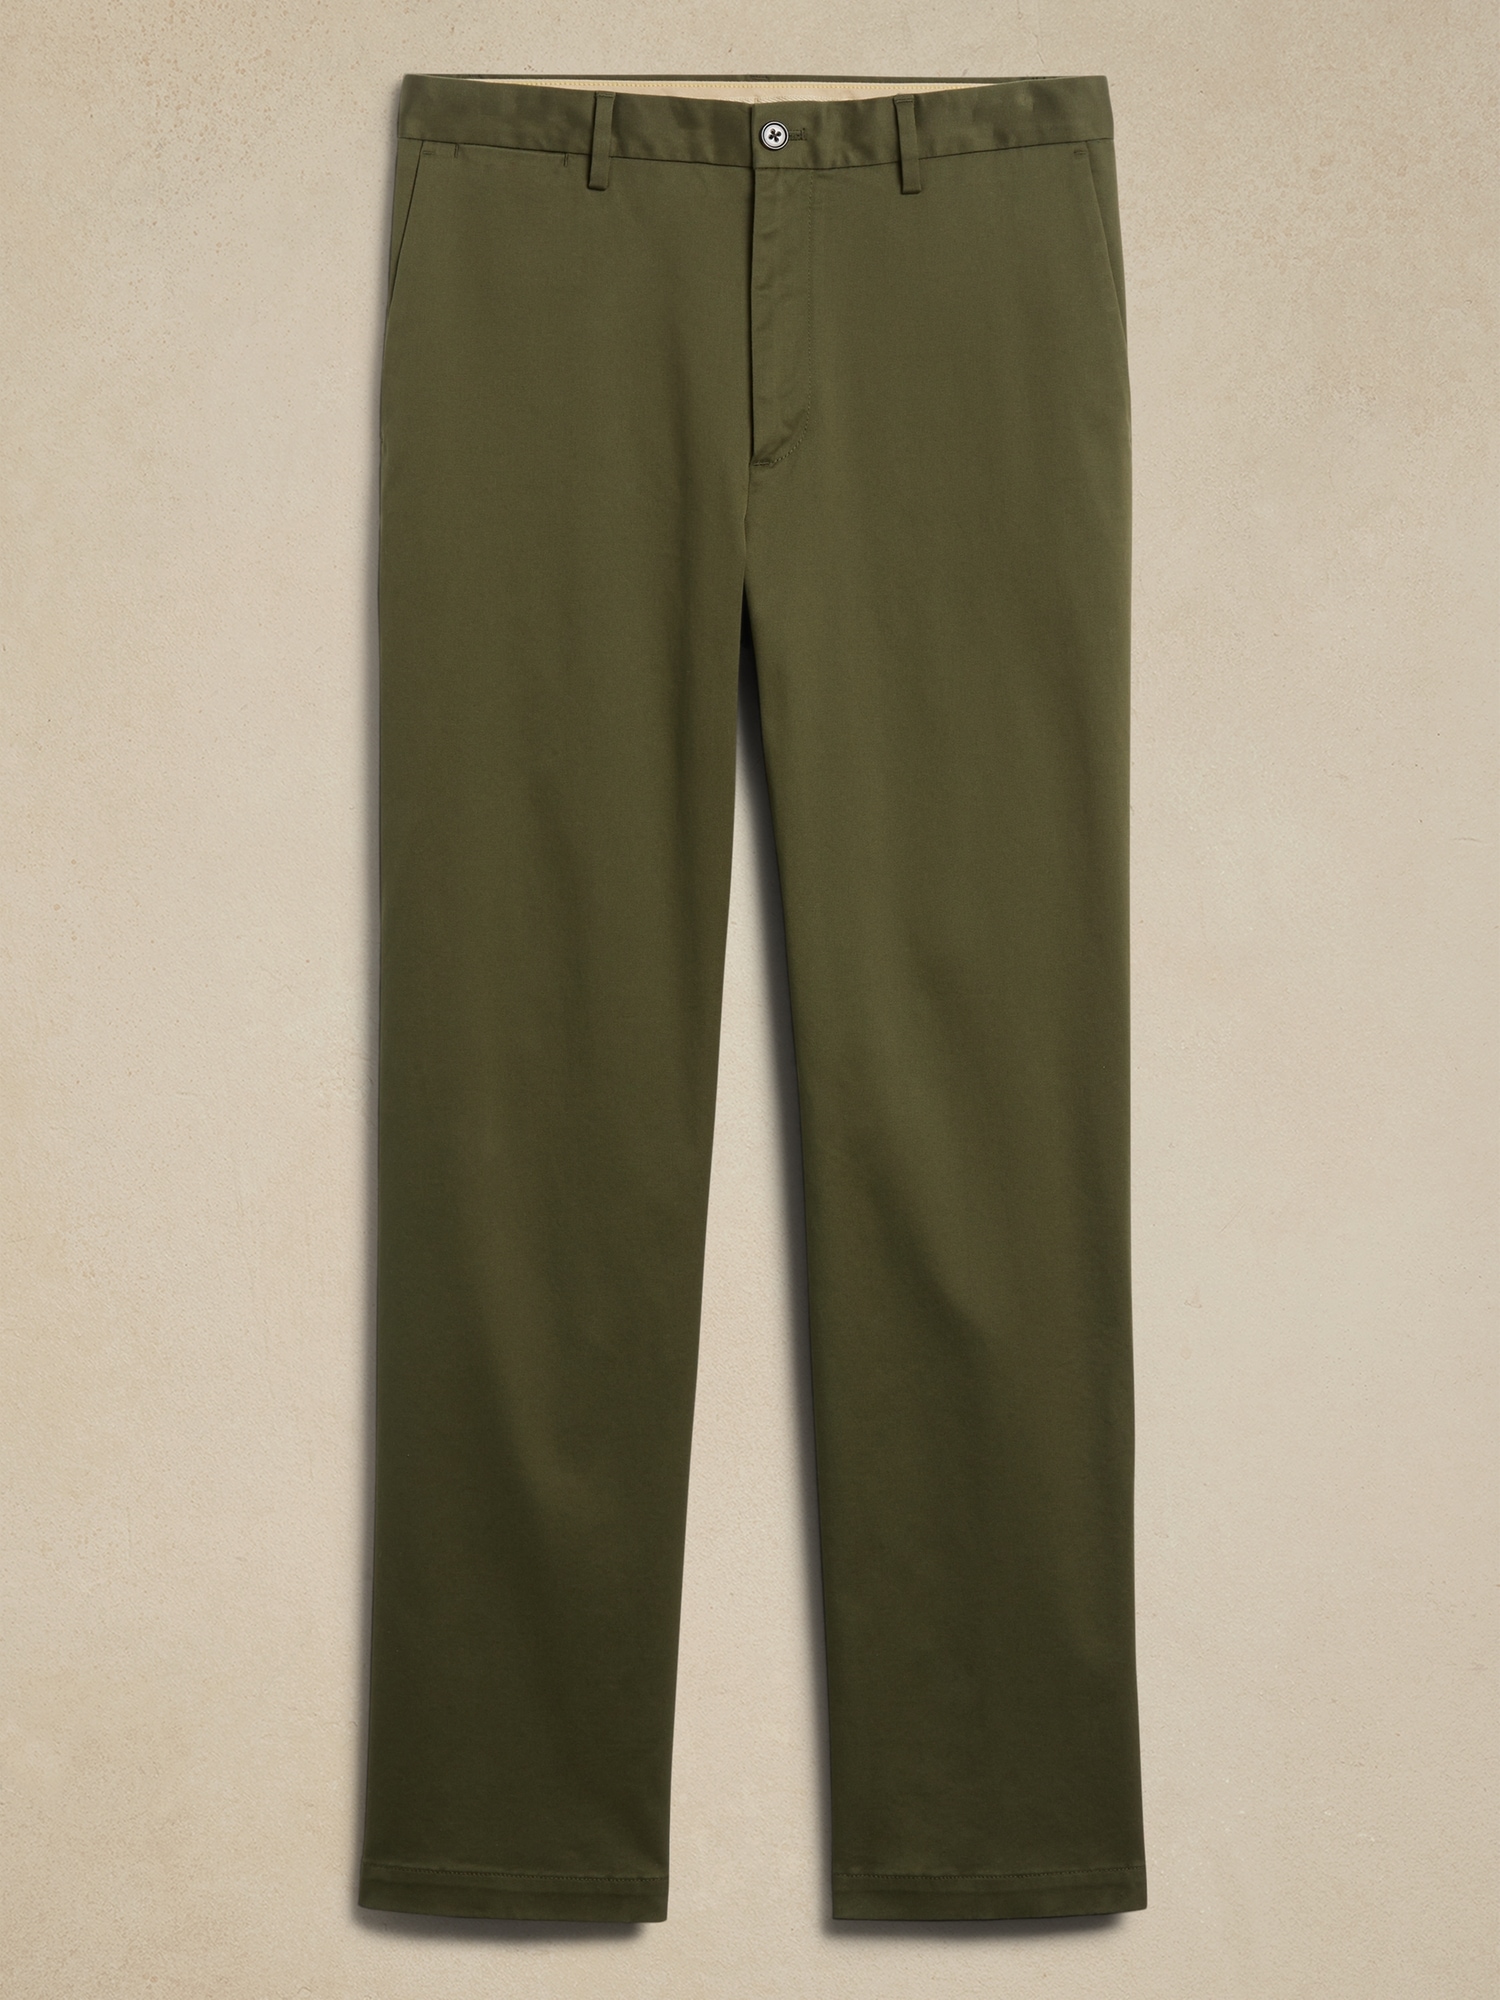 BR ARCHIVES Dawson Relaxed Rapid Movement Chino, Banana Republic